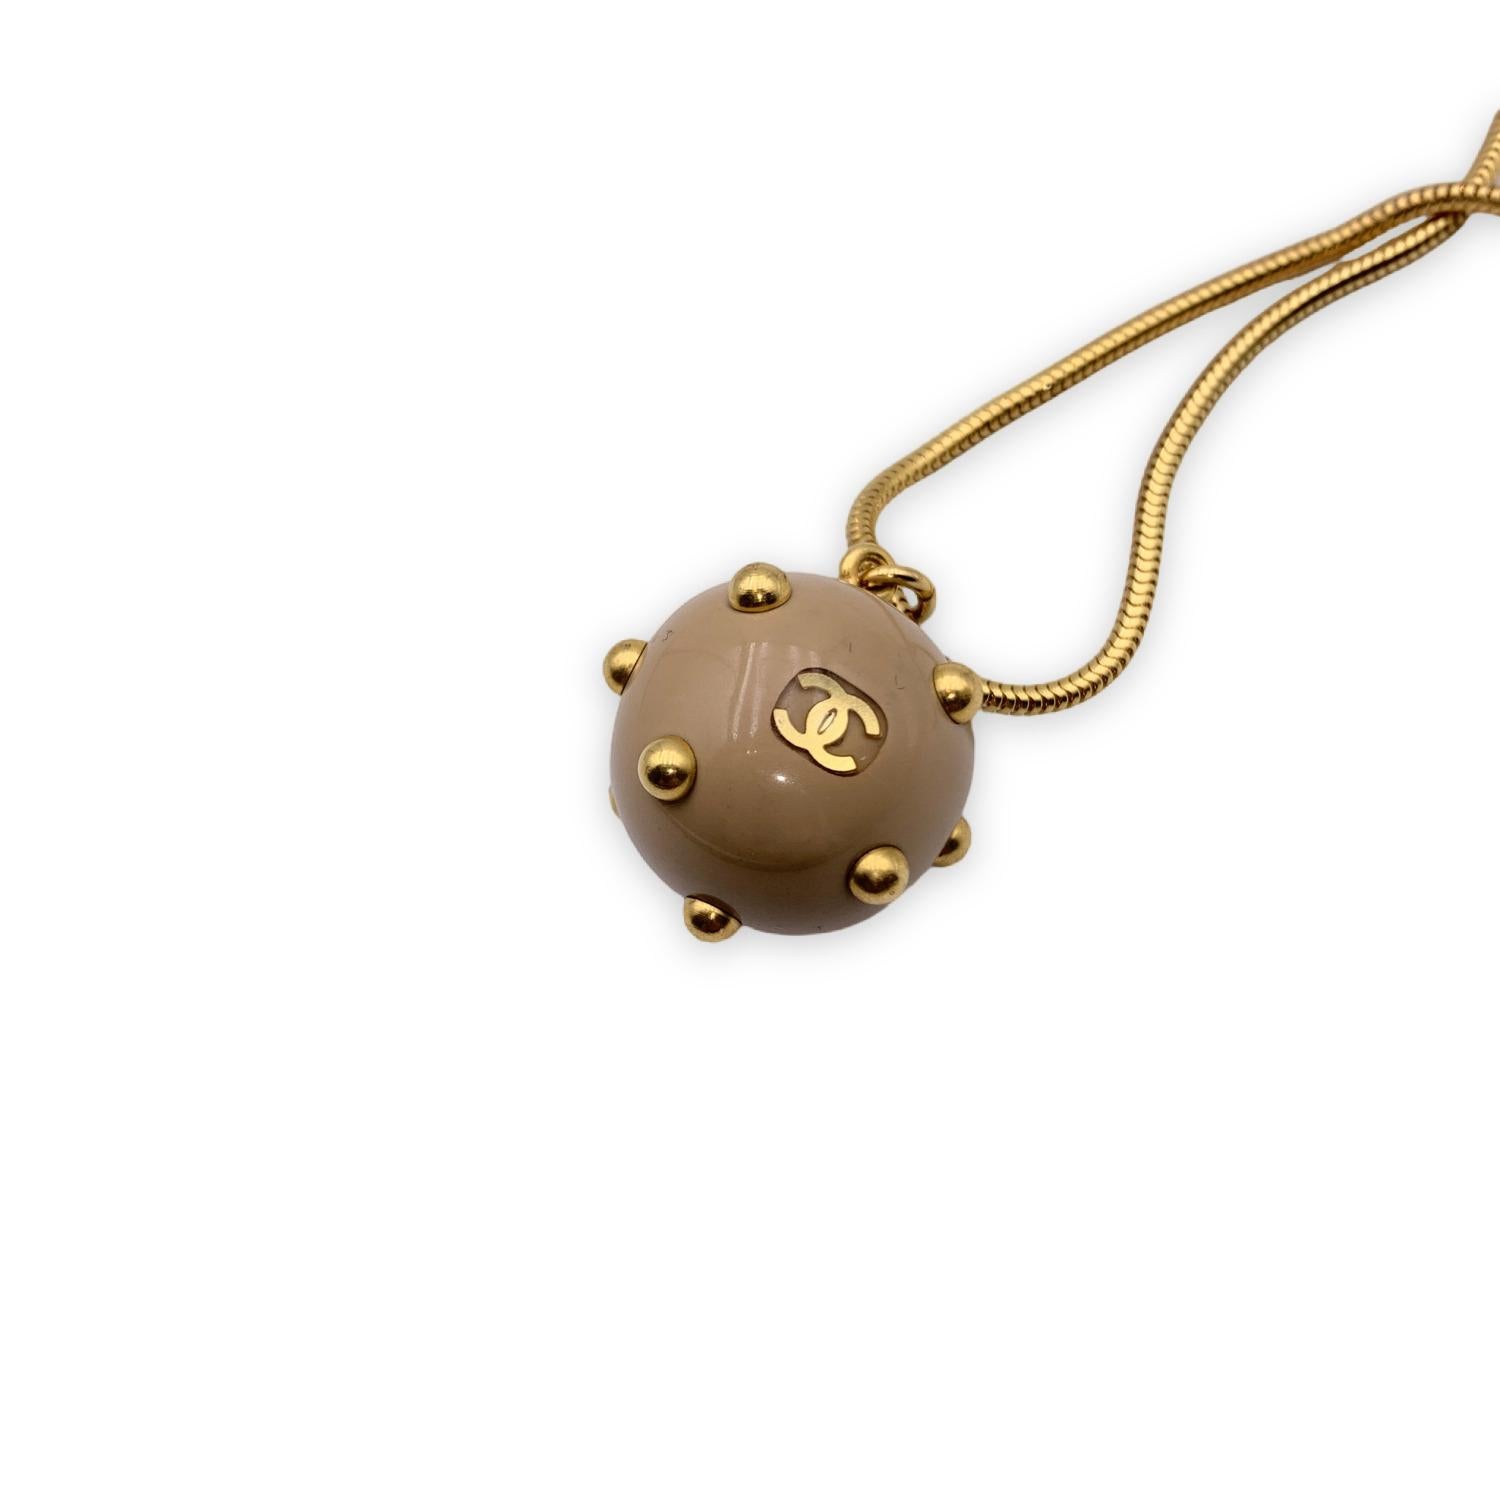 Gold metal chain necklace from CHANEL with beige Sphere. The Sphere is decorated with gold metal studs and small CC - Chanel logo.Snake chain with hook closure. Total length of the chain: 29.5 inches - 75 cm. 'CHANEL 00 CC A - Made in France' oval